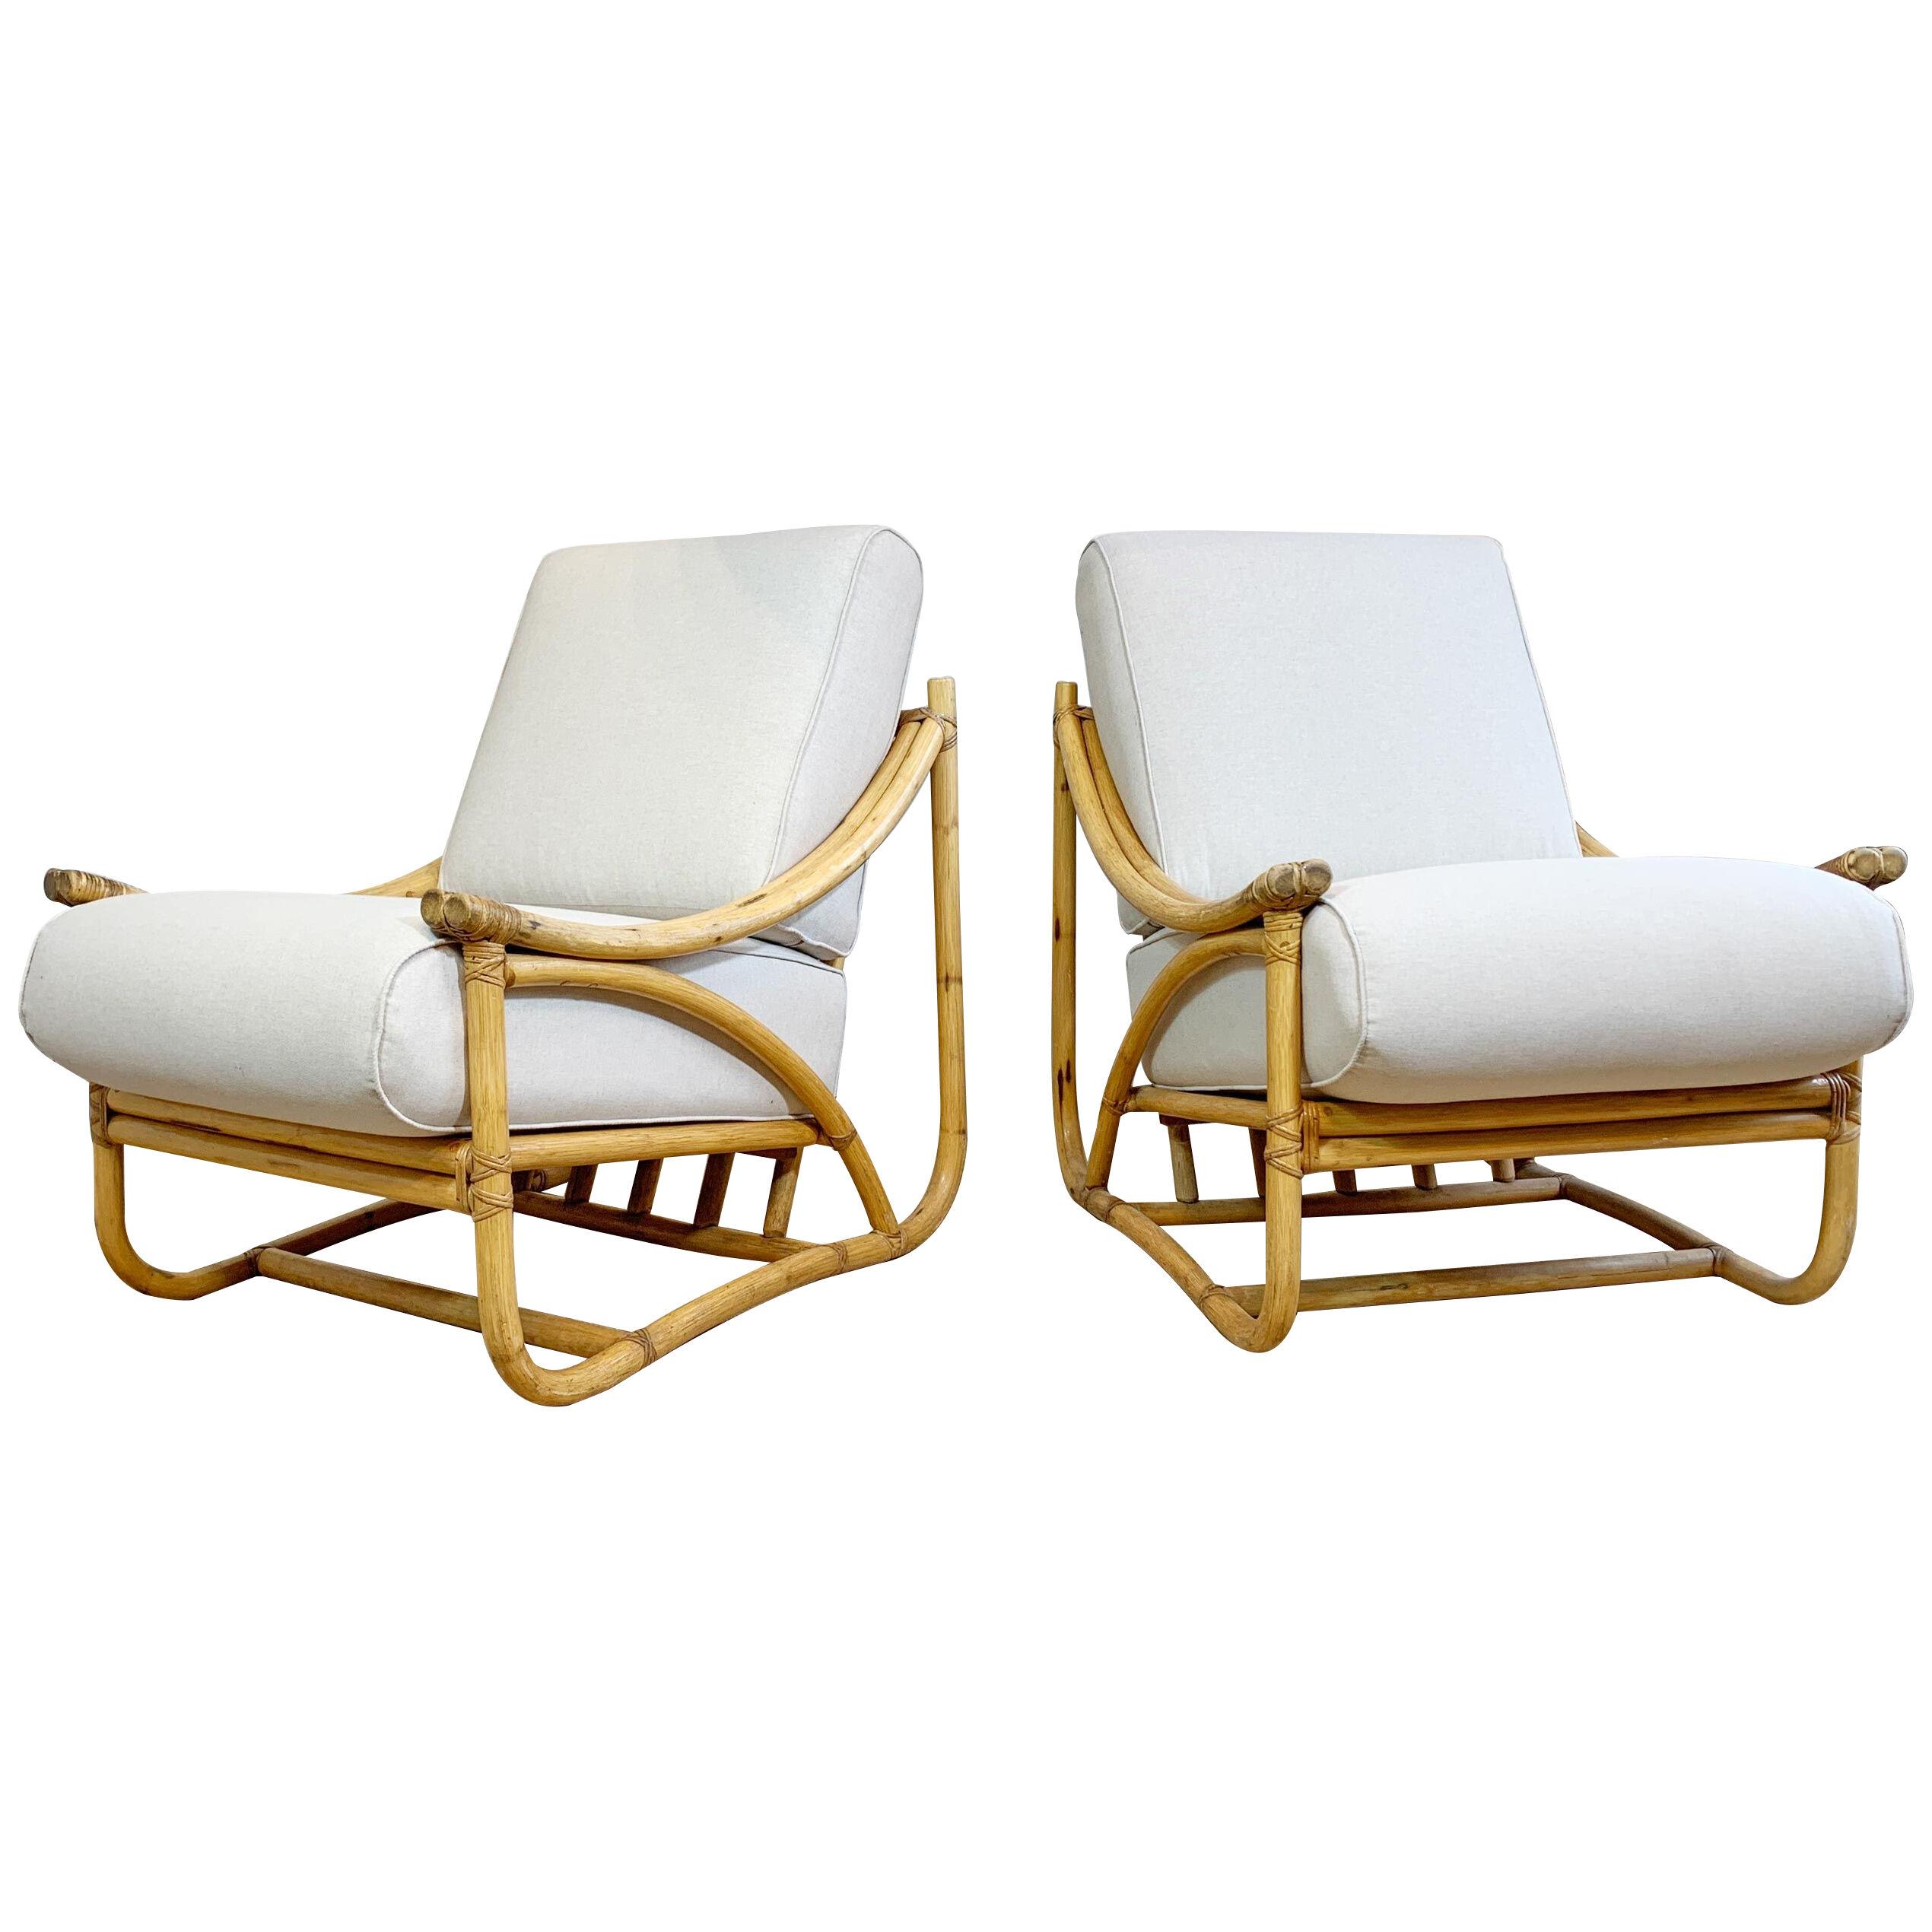 Pair of Angraves of Leicester Rattan Lounge Chairs 1950’s